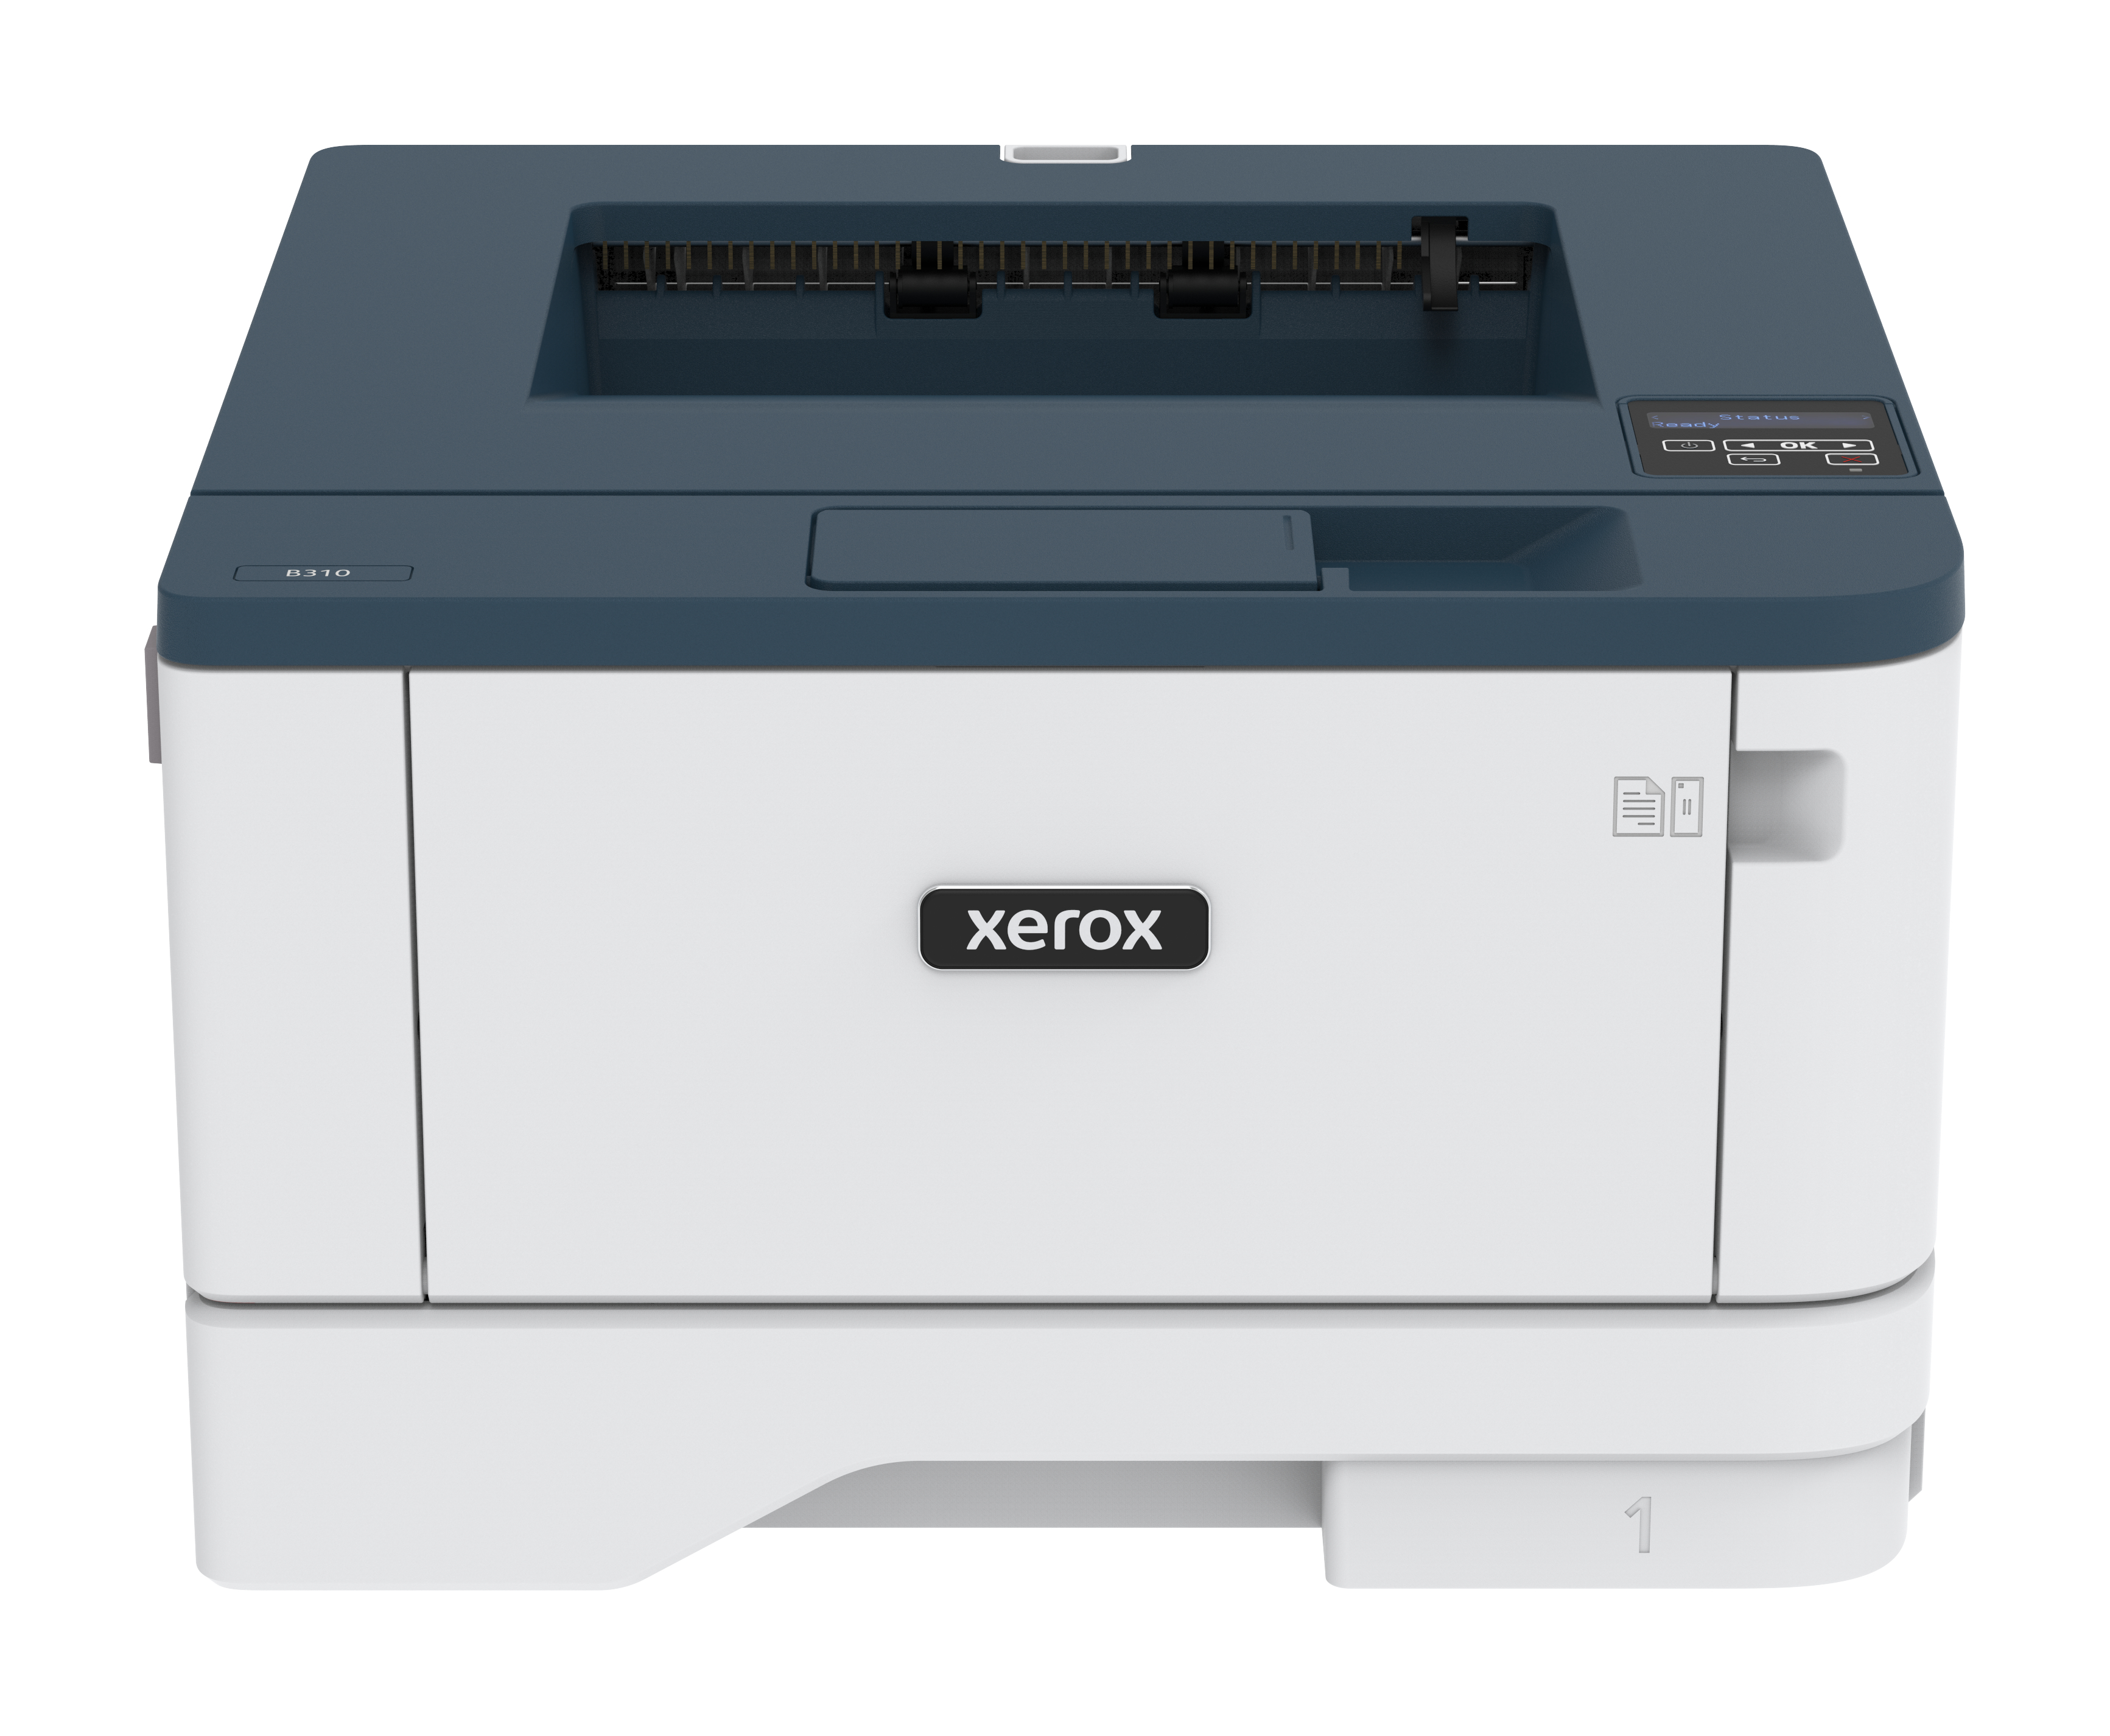 Xerox B310 Printer, Up To 42 ppm, Letter/Legal, USB/Ethernet And Wireless,  250-Sheet Tray, Automatic 2-Sided Printing, 110V B310/DNI - Xerox